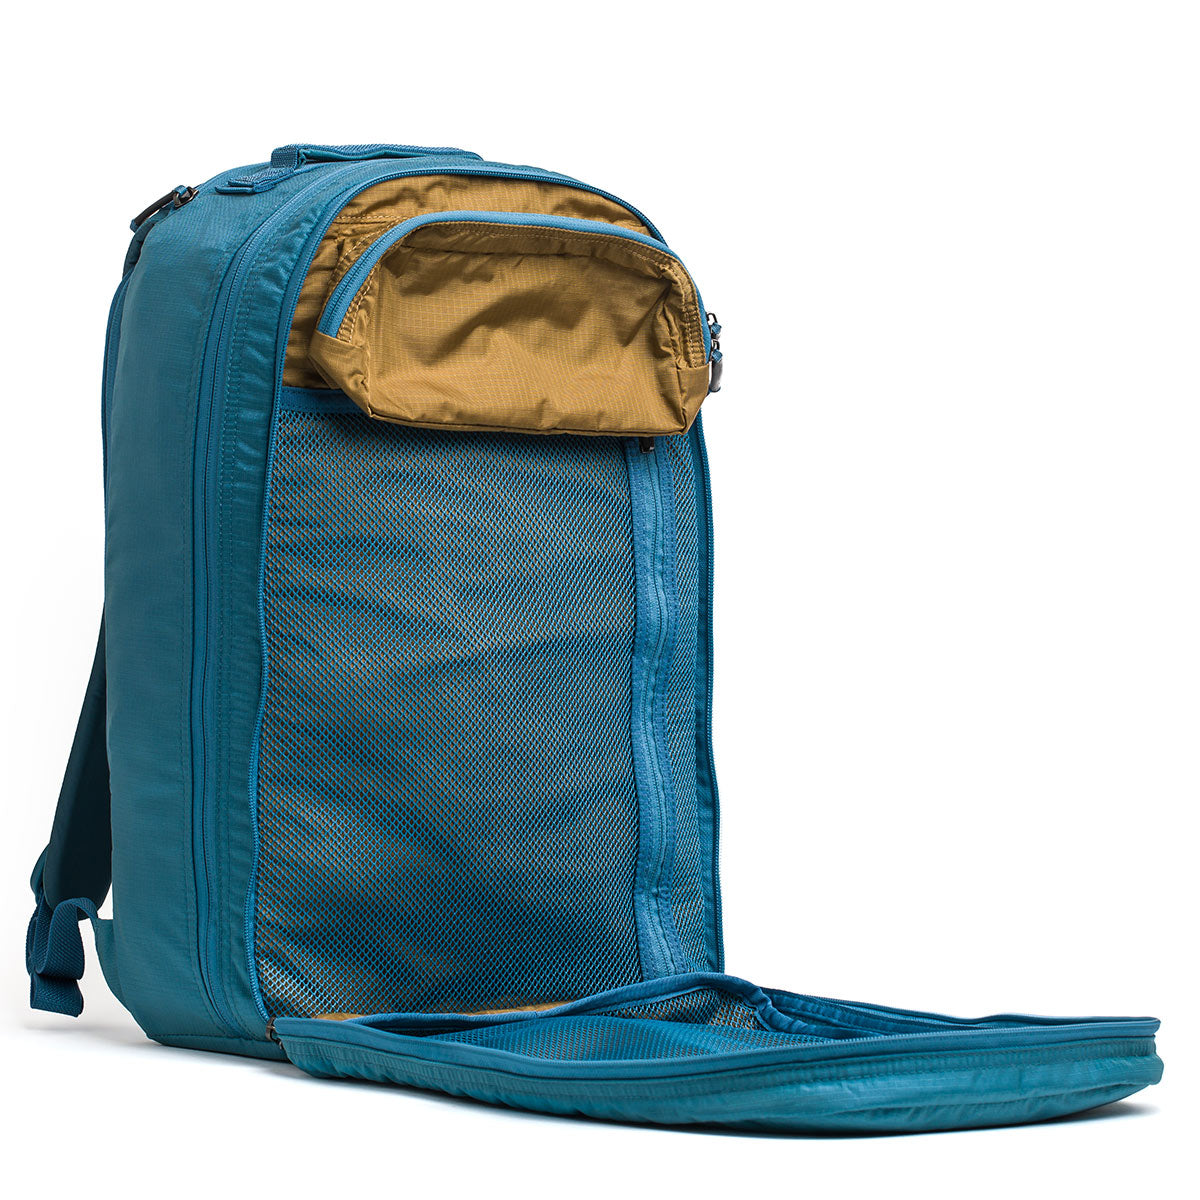 Bullet Ruck Double Compartment - Ripstop Nylon